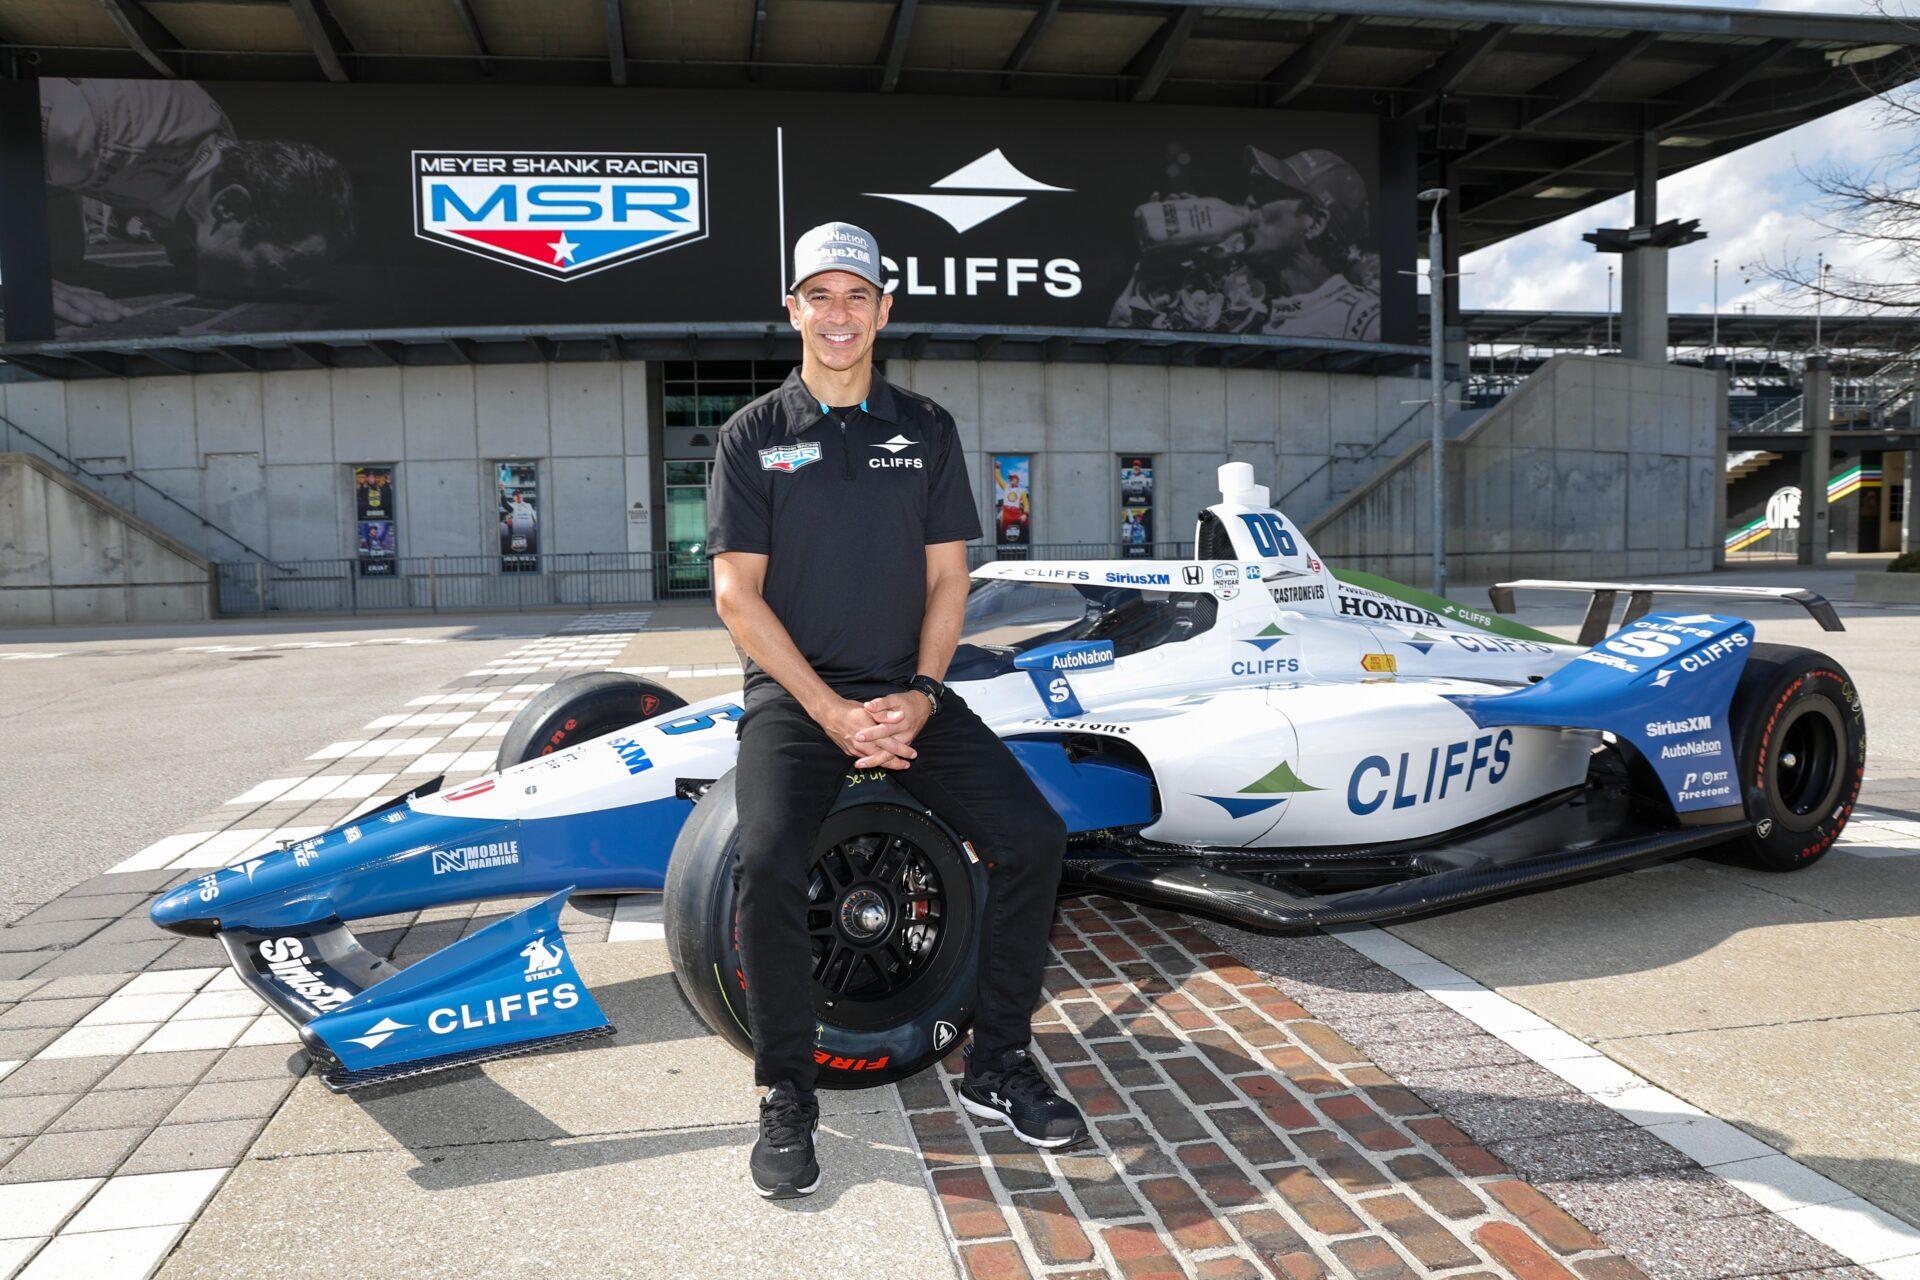 Helio-Castroneves-unveils-Cliffs-livery-for-108th-running-of-the-Indianapolis-500-Photo-by-Chris-Owens_Large-Image-Without-Watermark_m97236